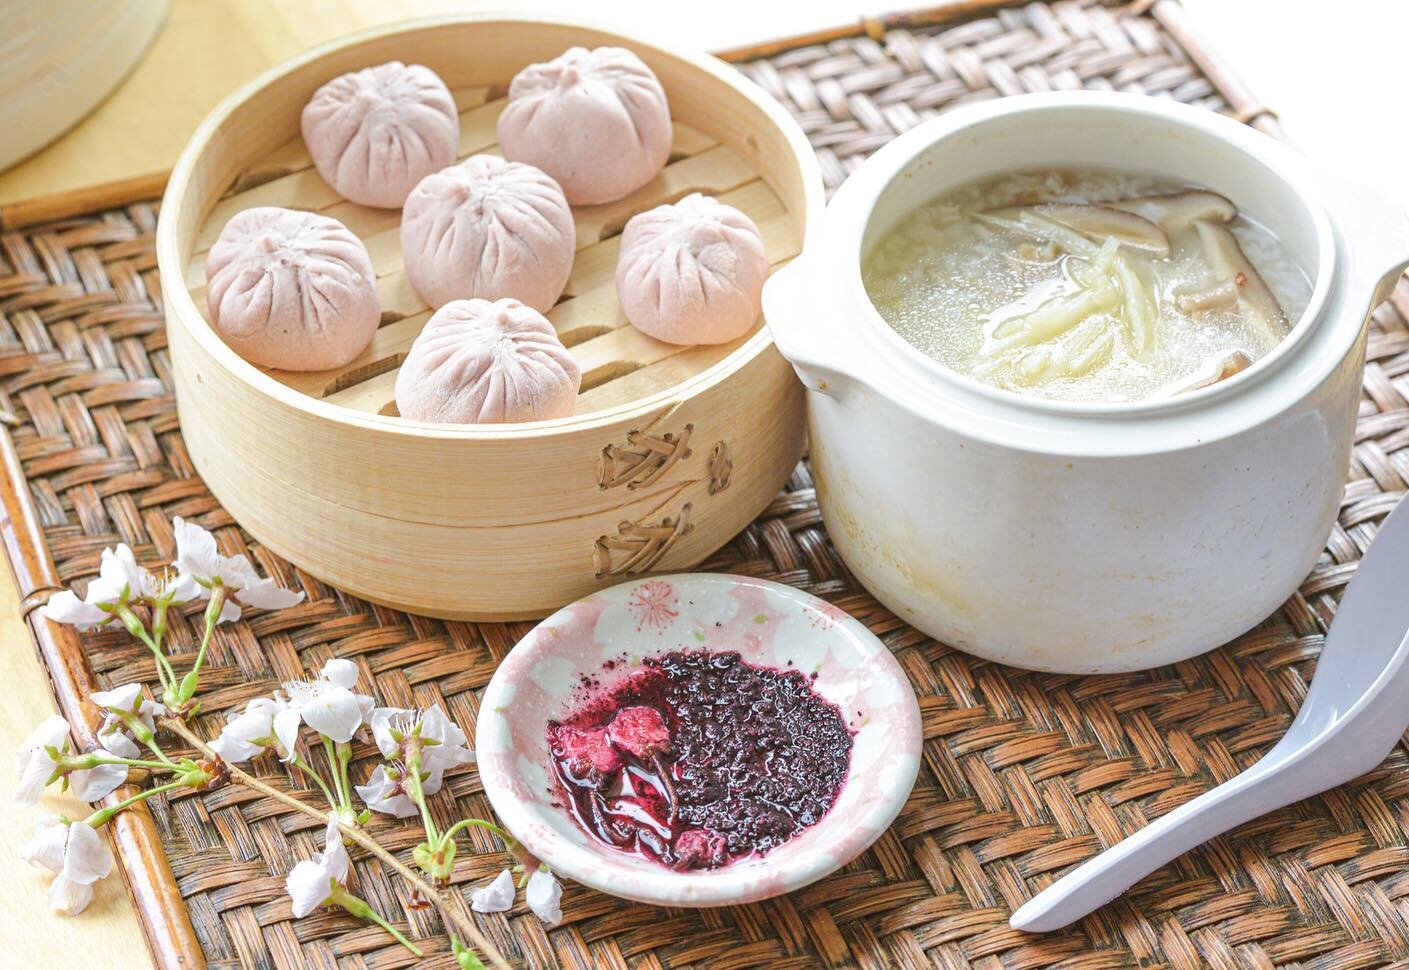 📌🌸Cherry blossom vegan soup dumplings + Hong Kong-styled Congee.  We saw the signs of Spring, and then we asked help from our Traditional Chinese Medicine advisor - what should people eat during Spring? Welp, congee was one of the answers. Let&rsqu